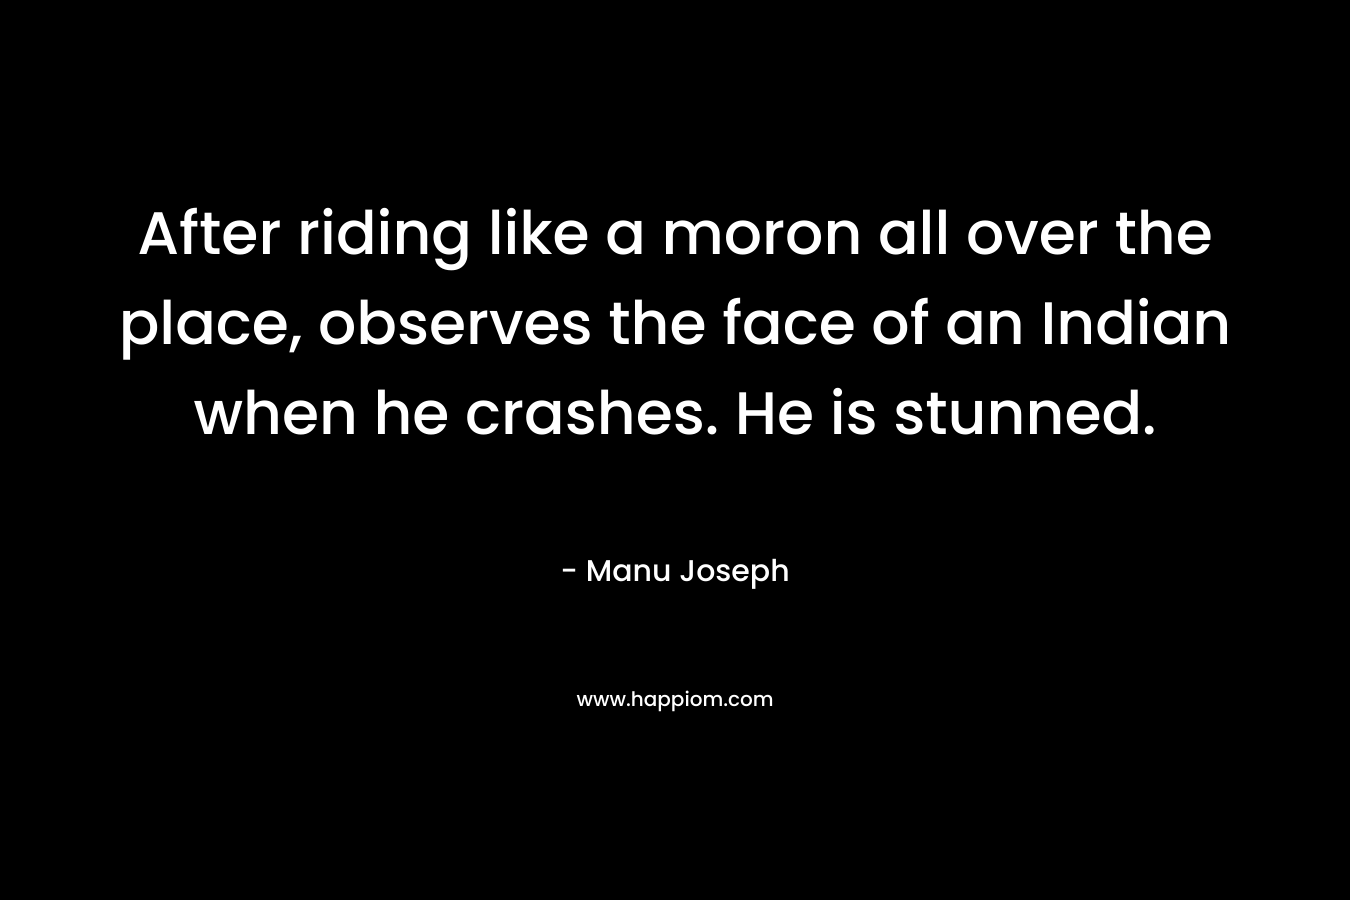 After riding like a moron all over the place, observes the face of an Indian when he crashes. He is stunned. – Manu Joseph